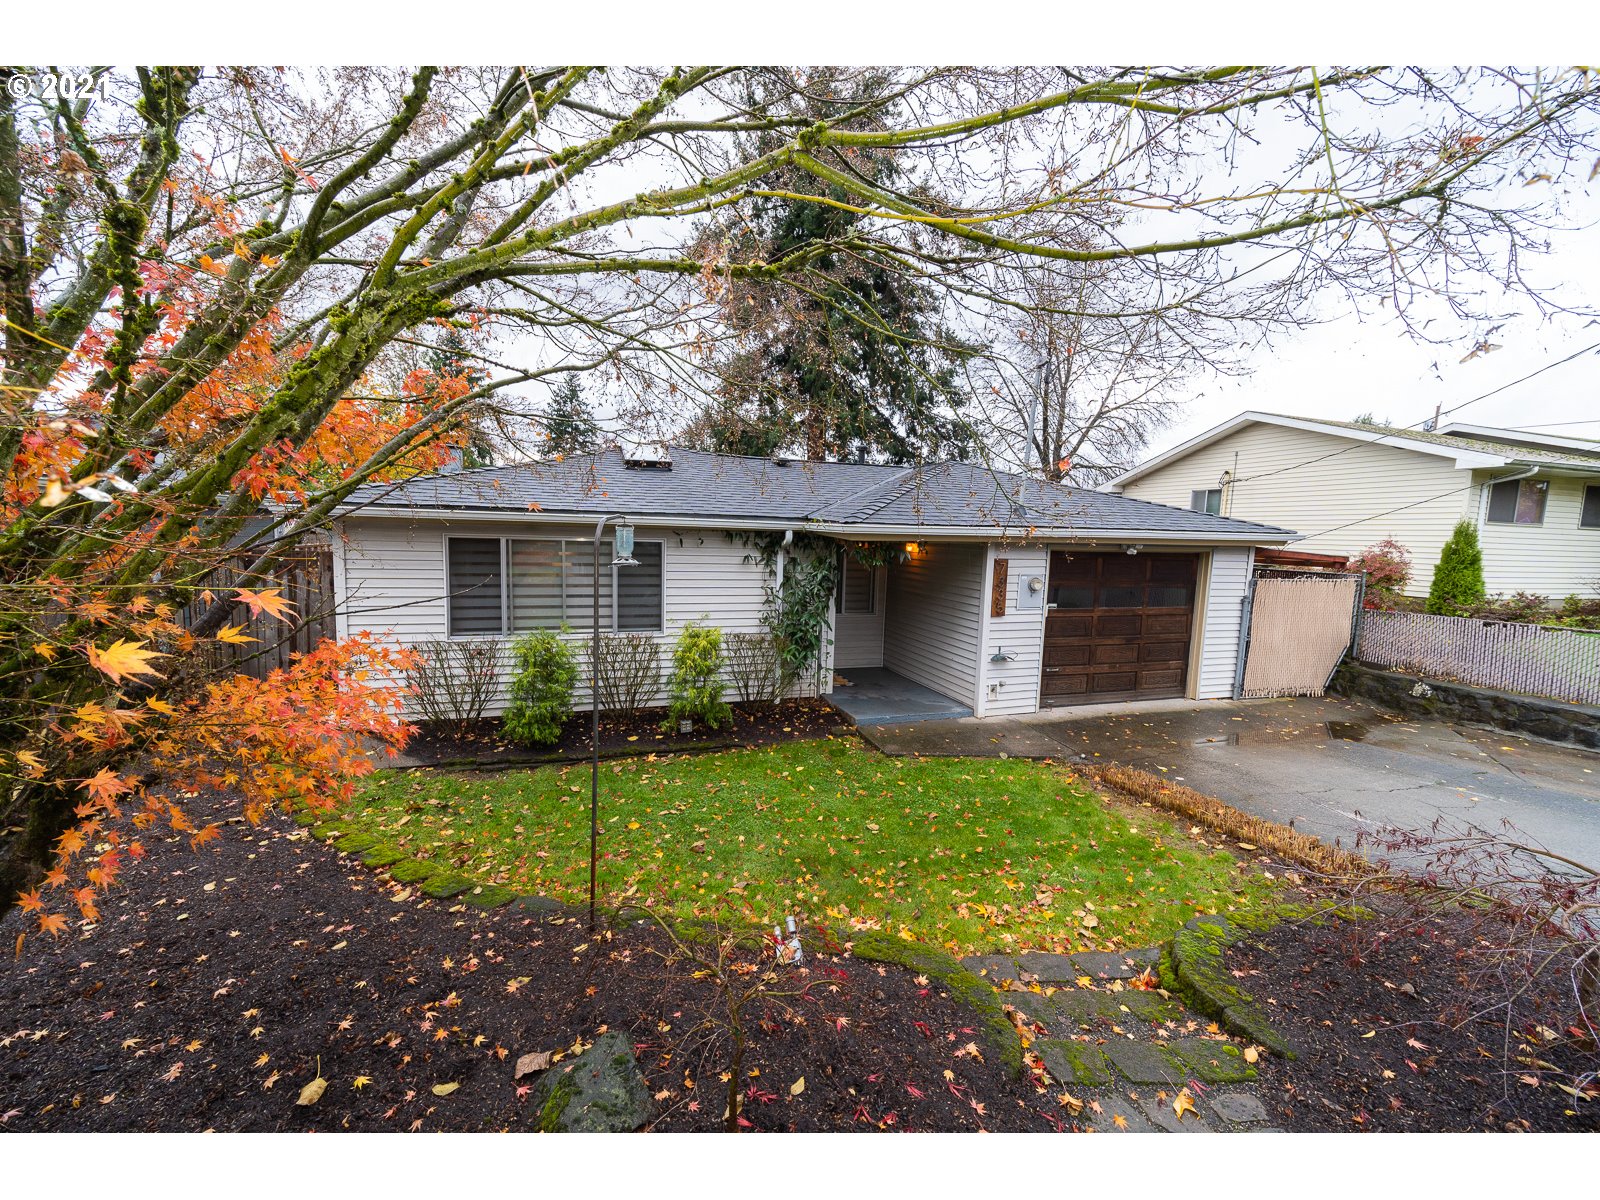 7335 SE 48TH AVE (1 of 29)